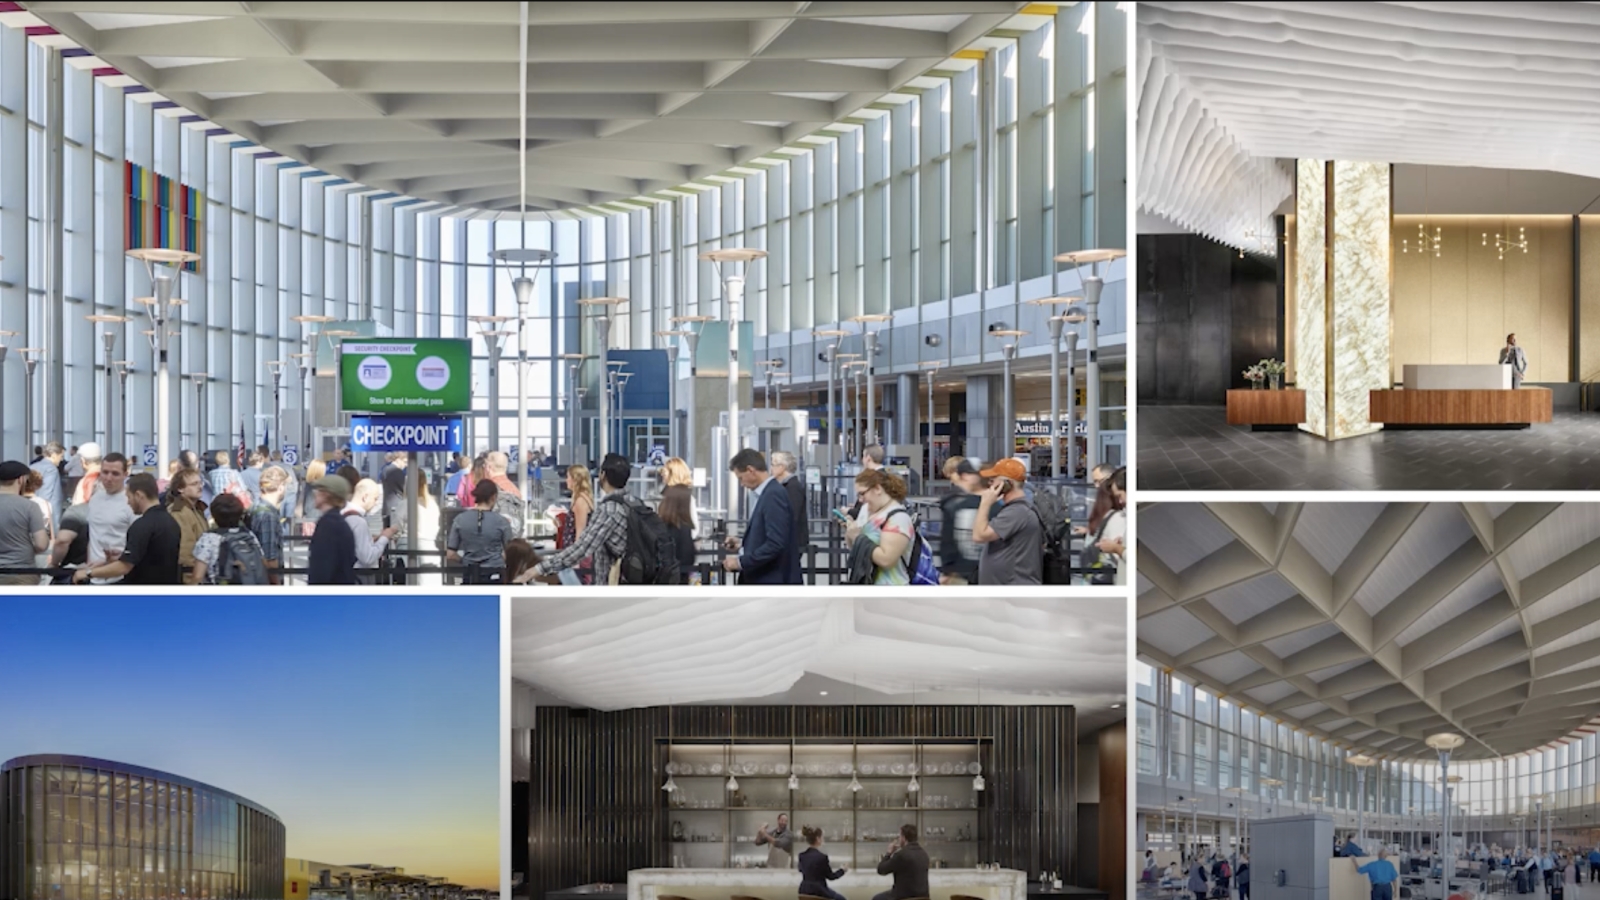 Photo collage of airports and building lobbies